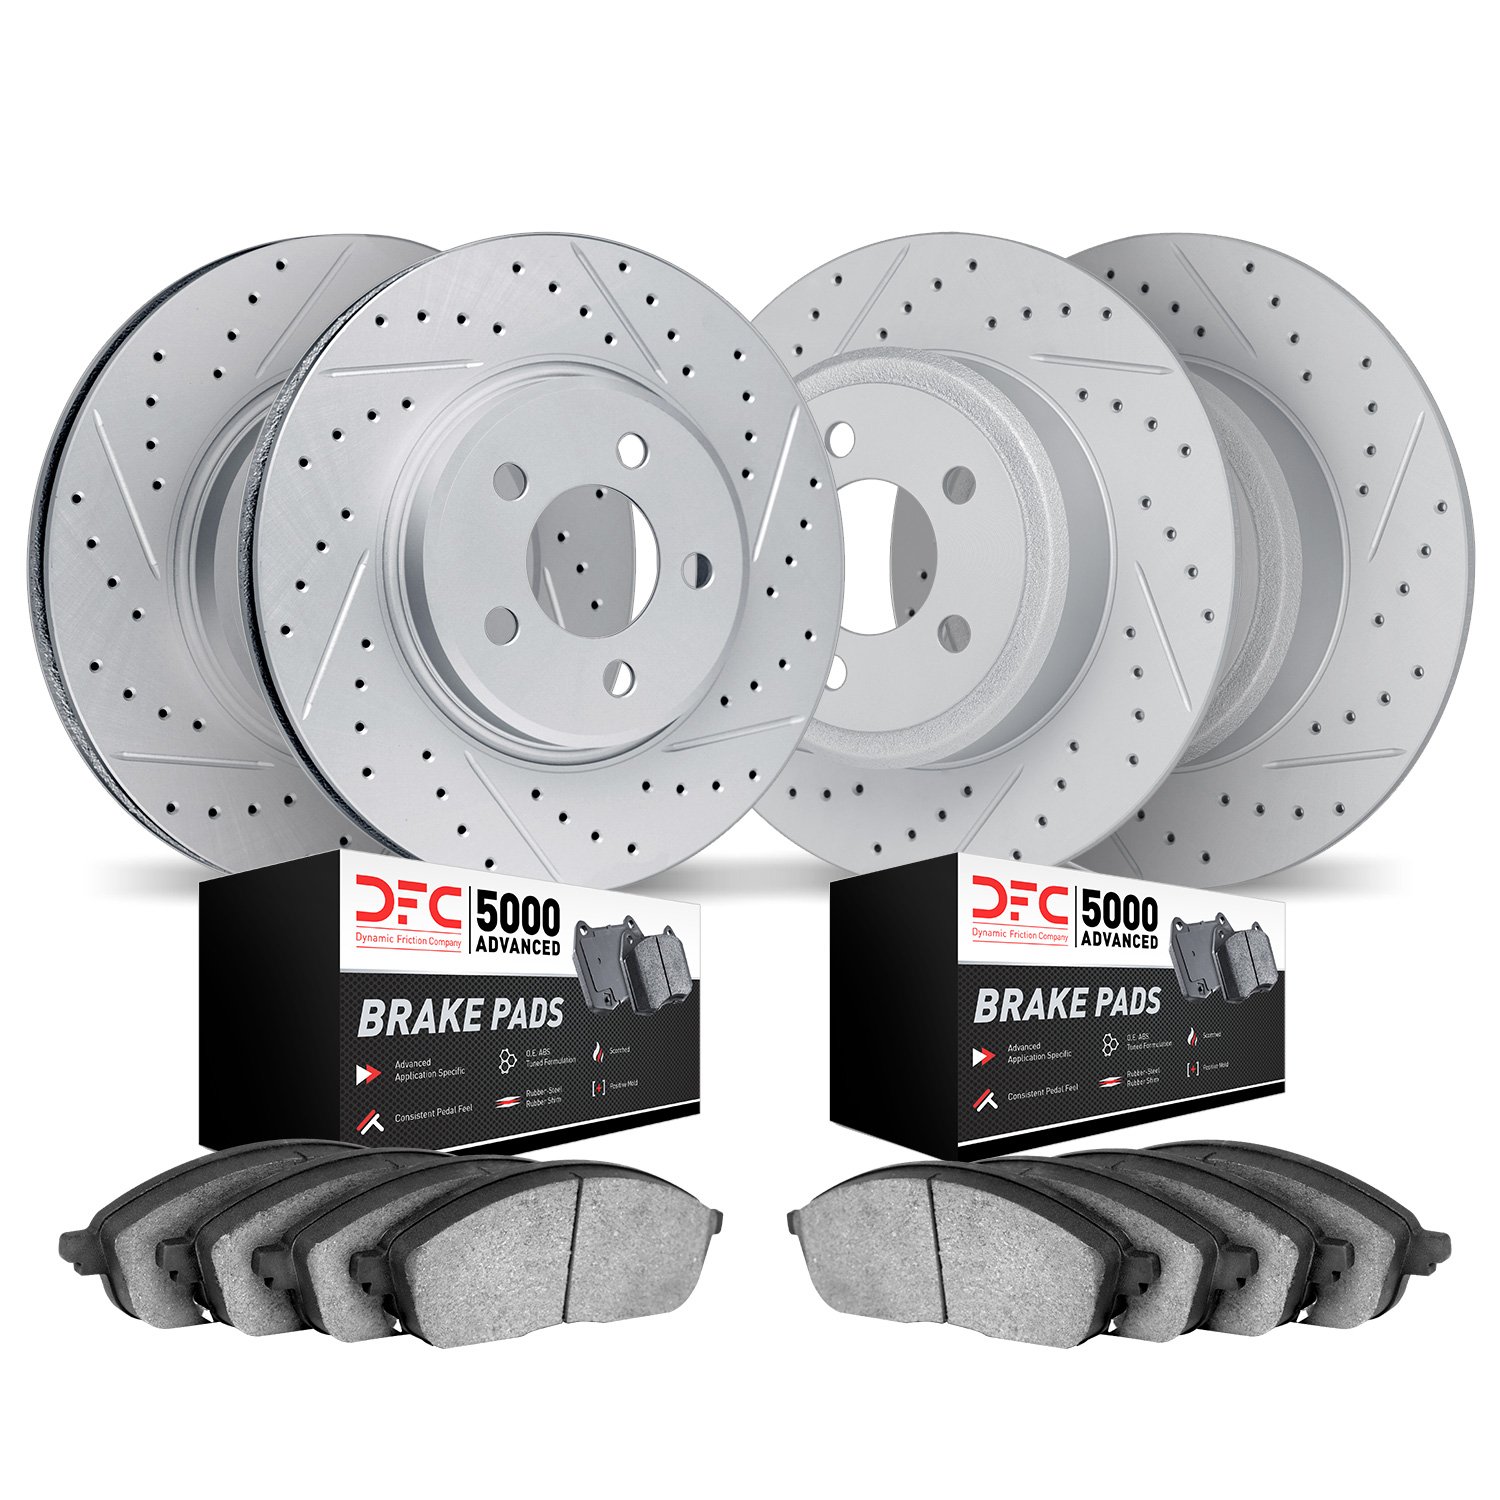 2504-45026 Geoperformance Drilled/Slotted Rotors w/5000 Advanced Brake Pads Kit, Fits Select GM, Position: Front and Rear